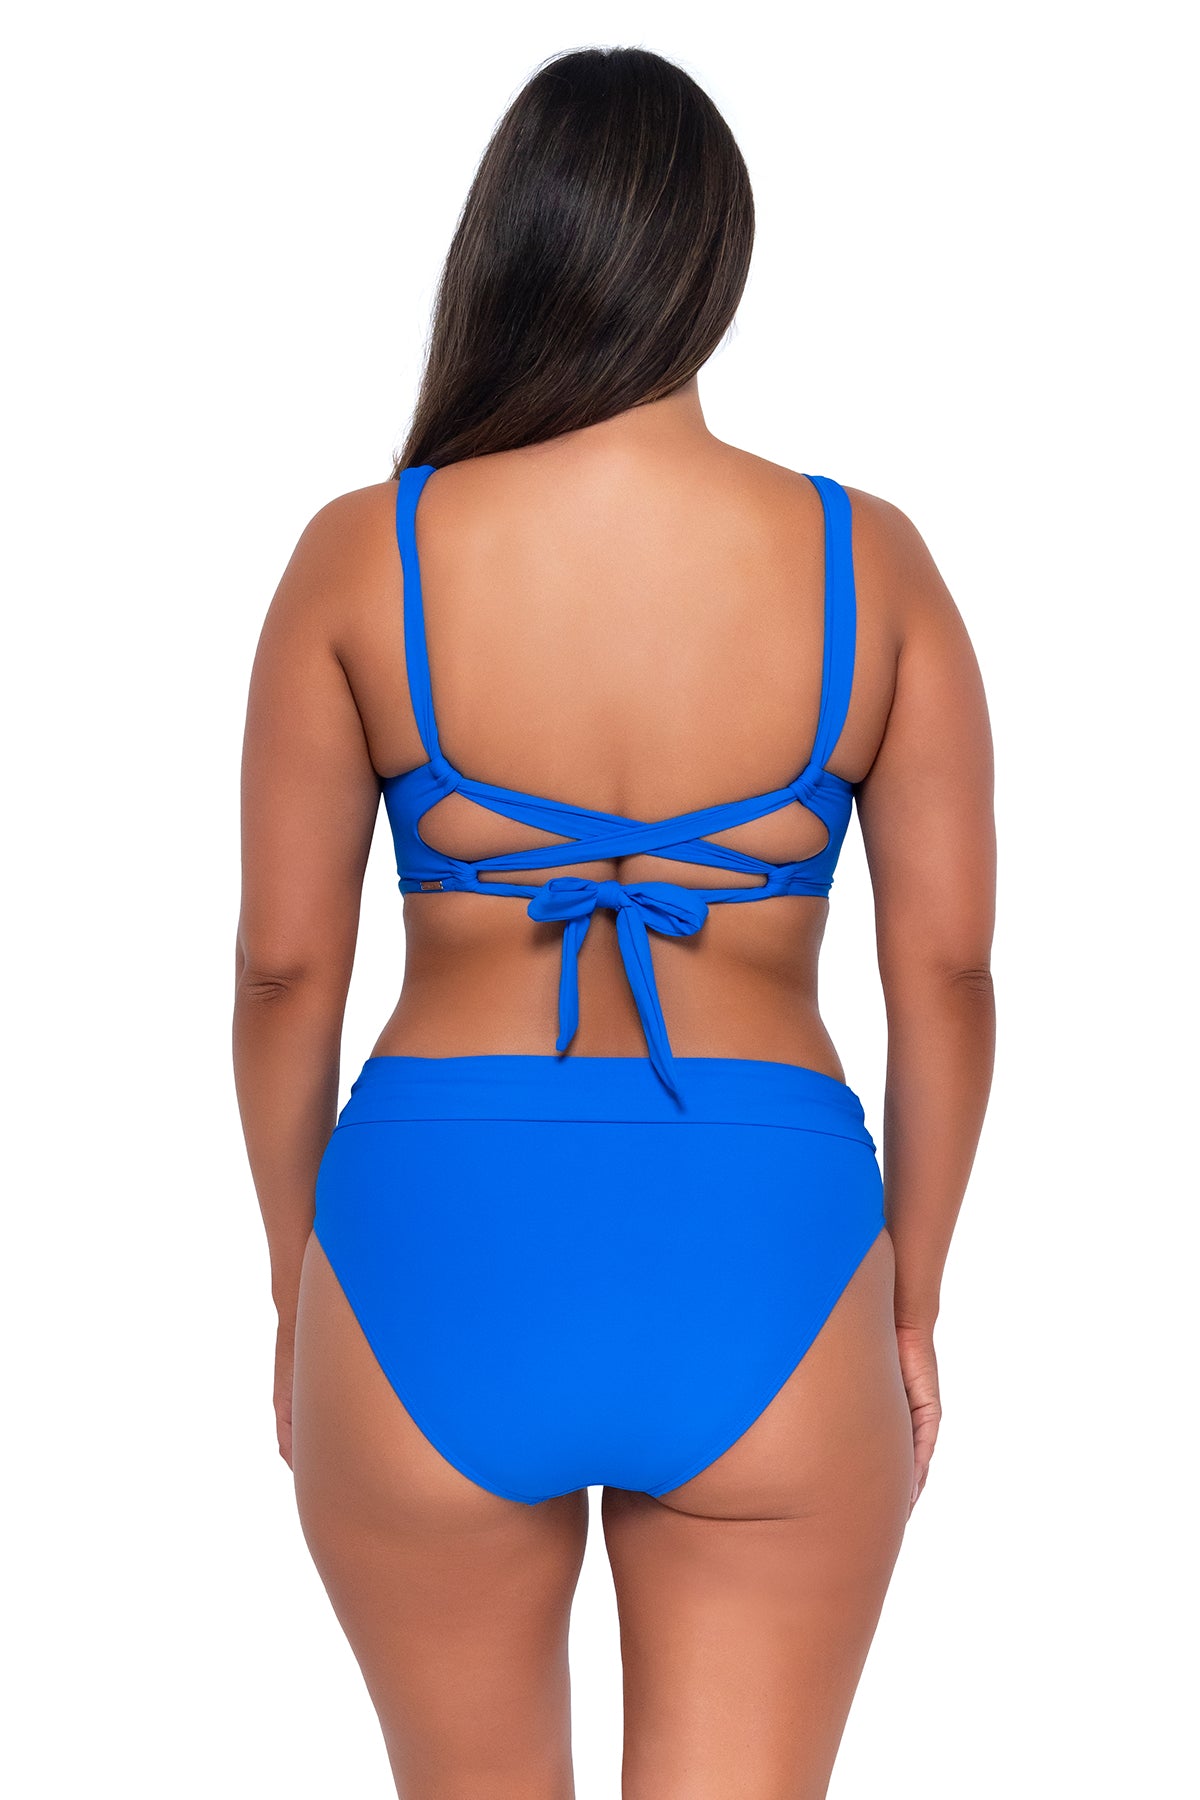 Back pose #1 of Nicky wearing Sunsets Electric Blue Elsie Top with matching Hannah High Waist bikini bottom